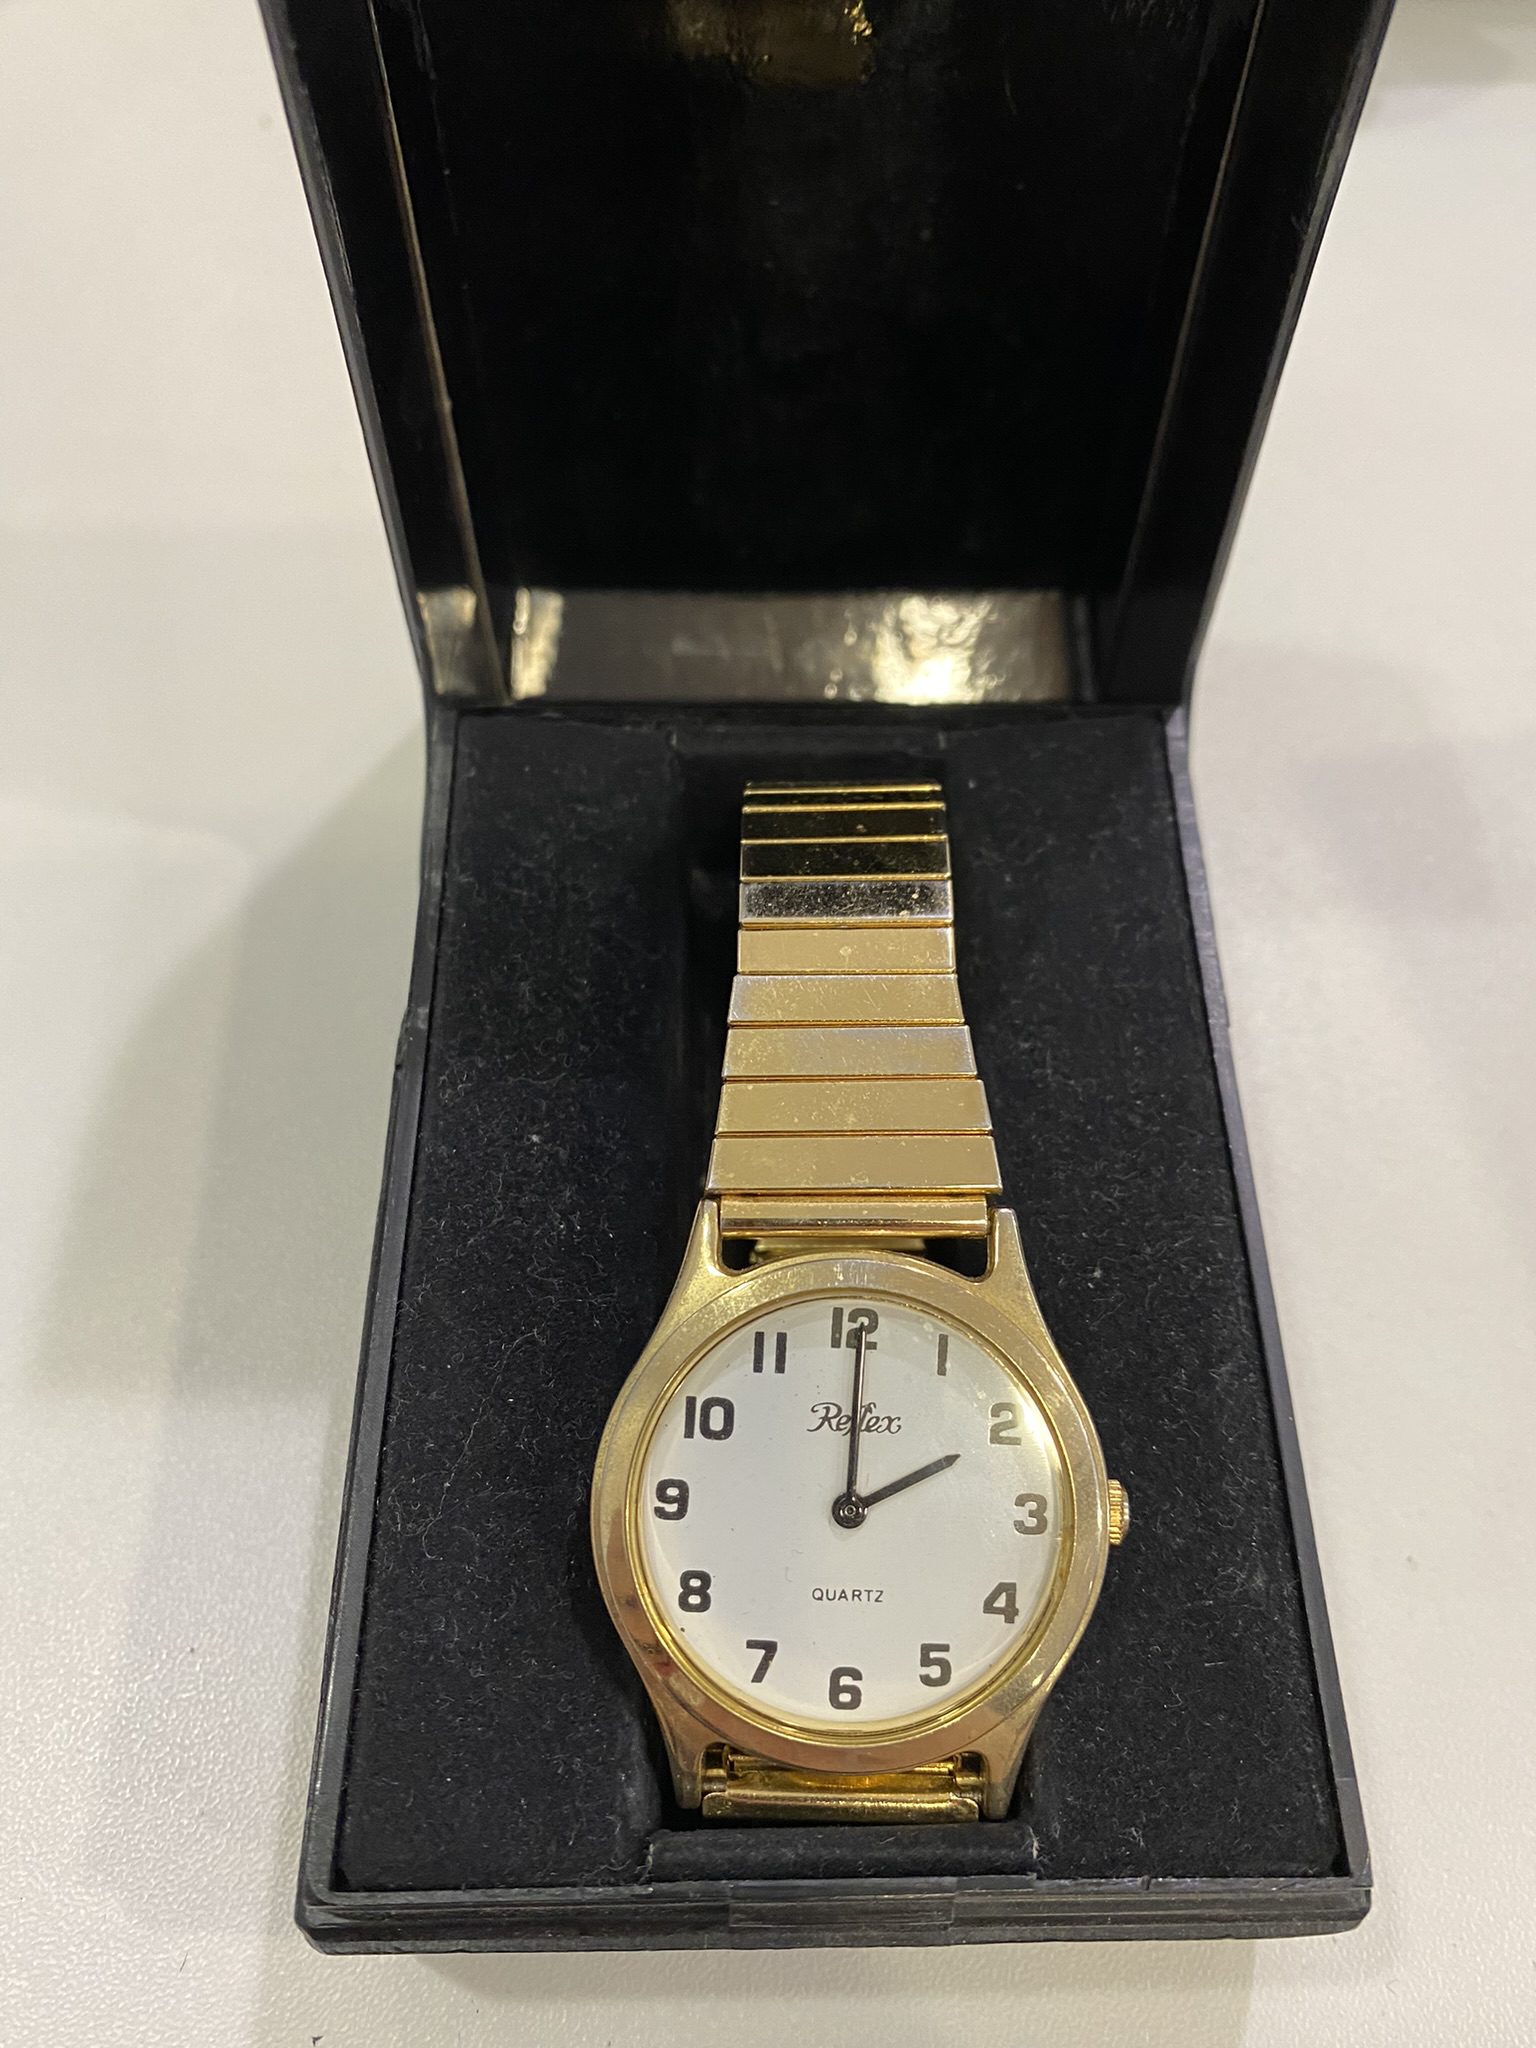 Large text watch with gold strap.